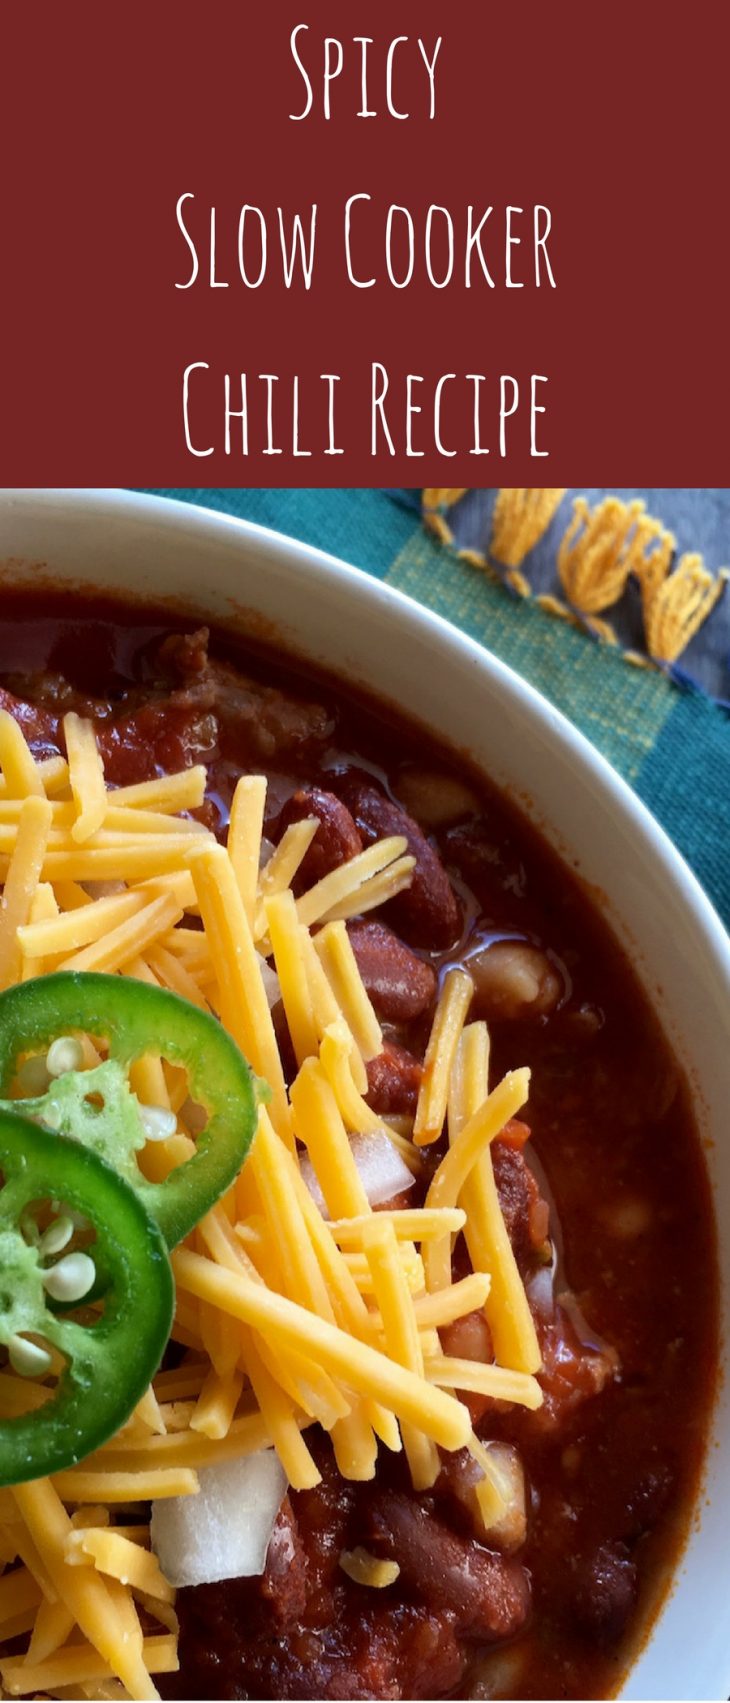 Spicy Slow Cooker Chili Recipe